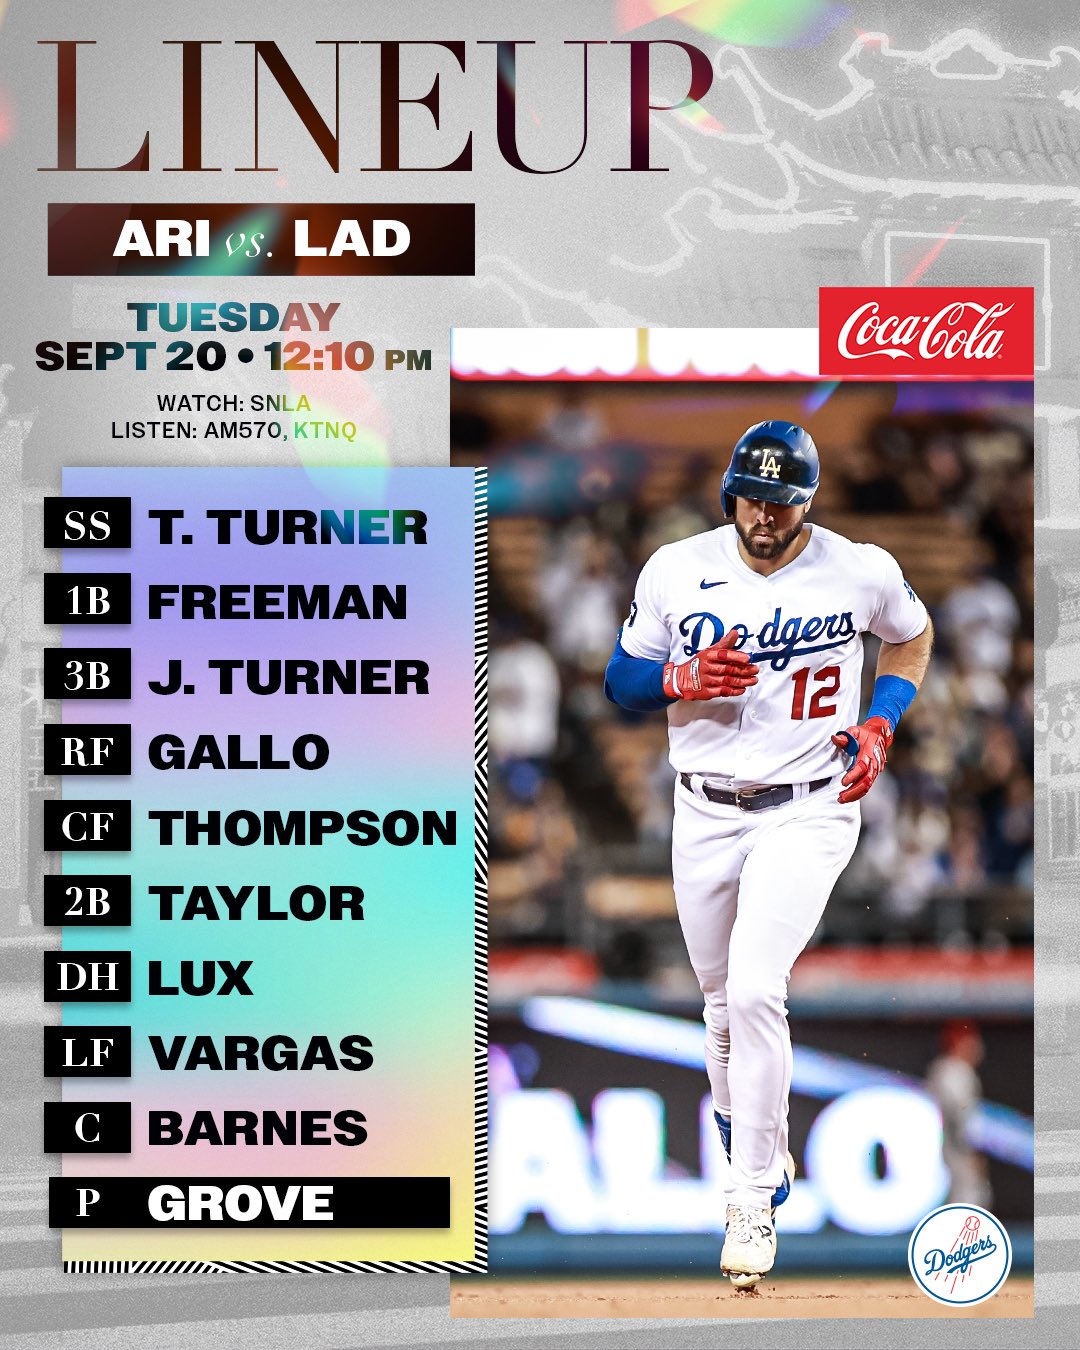 Los Angeles Dodgers on X: Today's #Dodgers Game 1 lineup vs. D